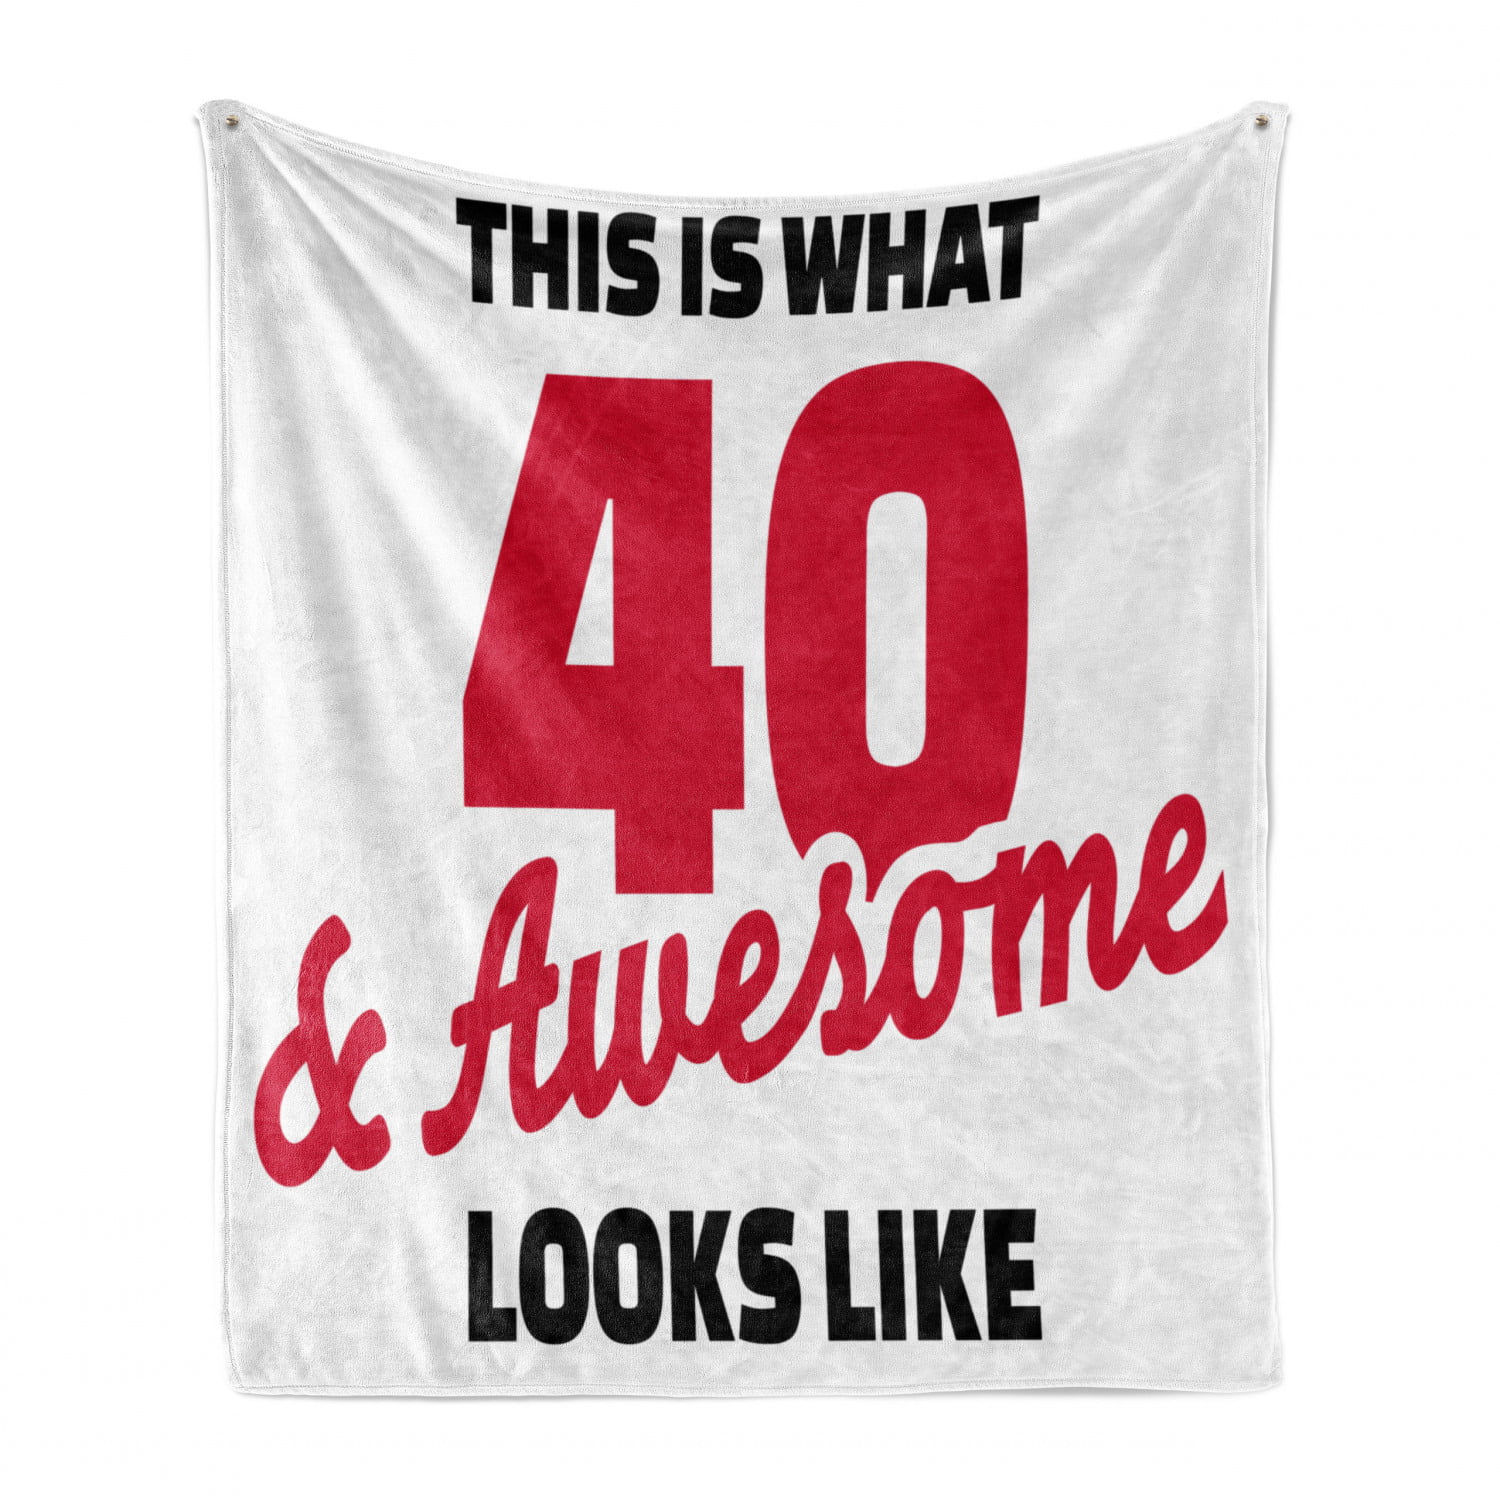 70 x 90 Cozy Plush for Indoor and Outdoor Use Ambesonne 40th Birthday Soft Flannel Fleece Throw Blanket Pink Black White 40 Hilarious Birthday Slogan Cool Humor